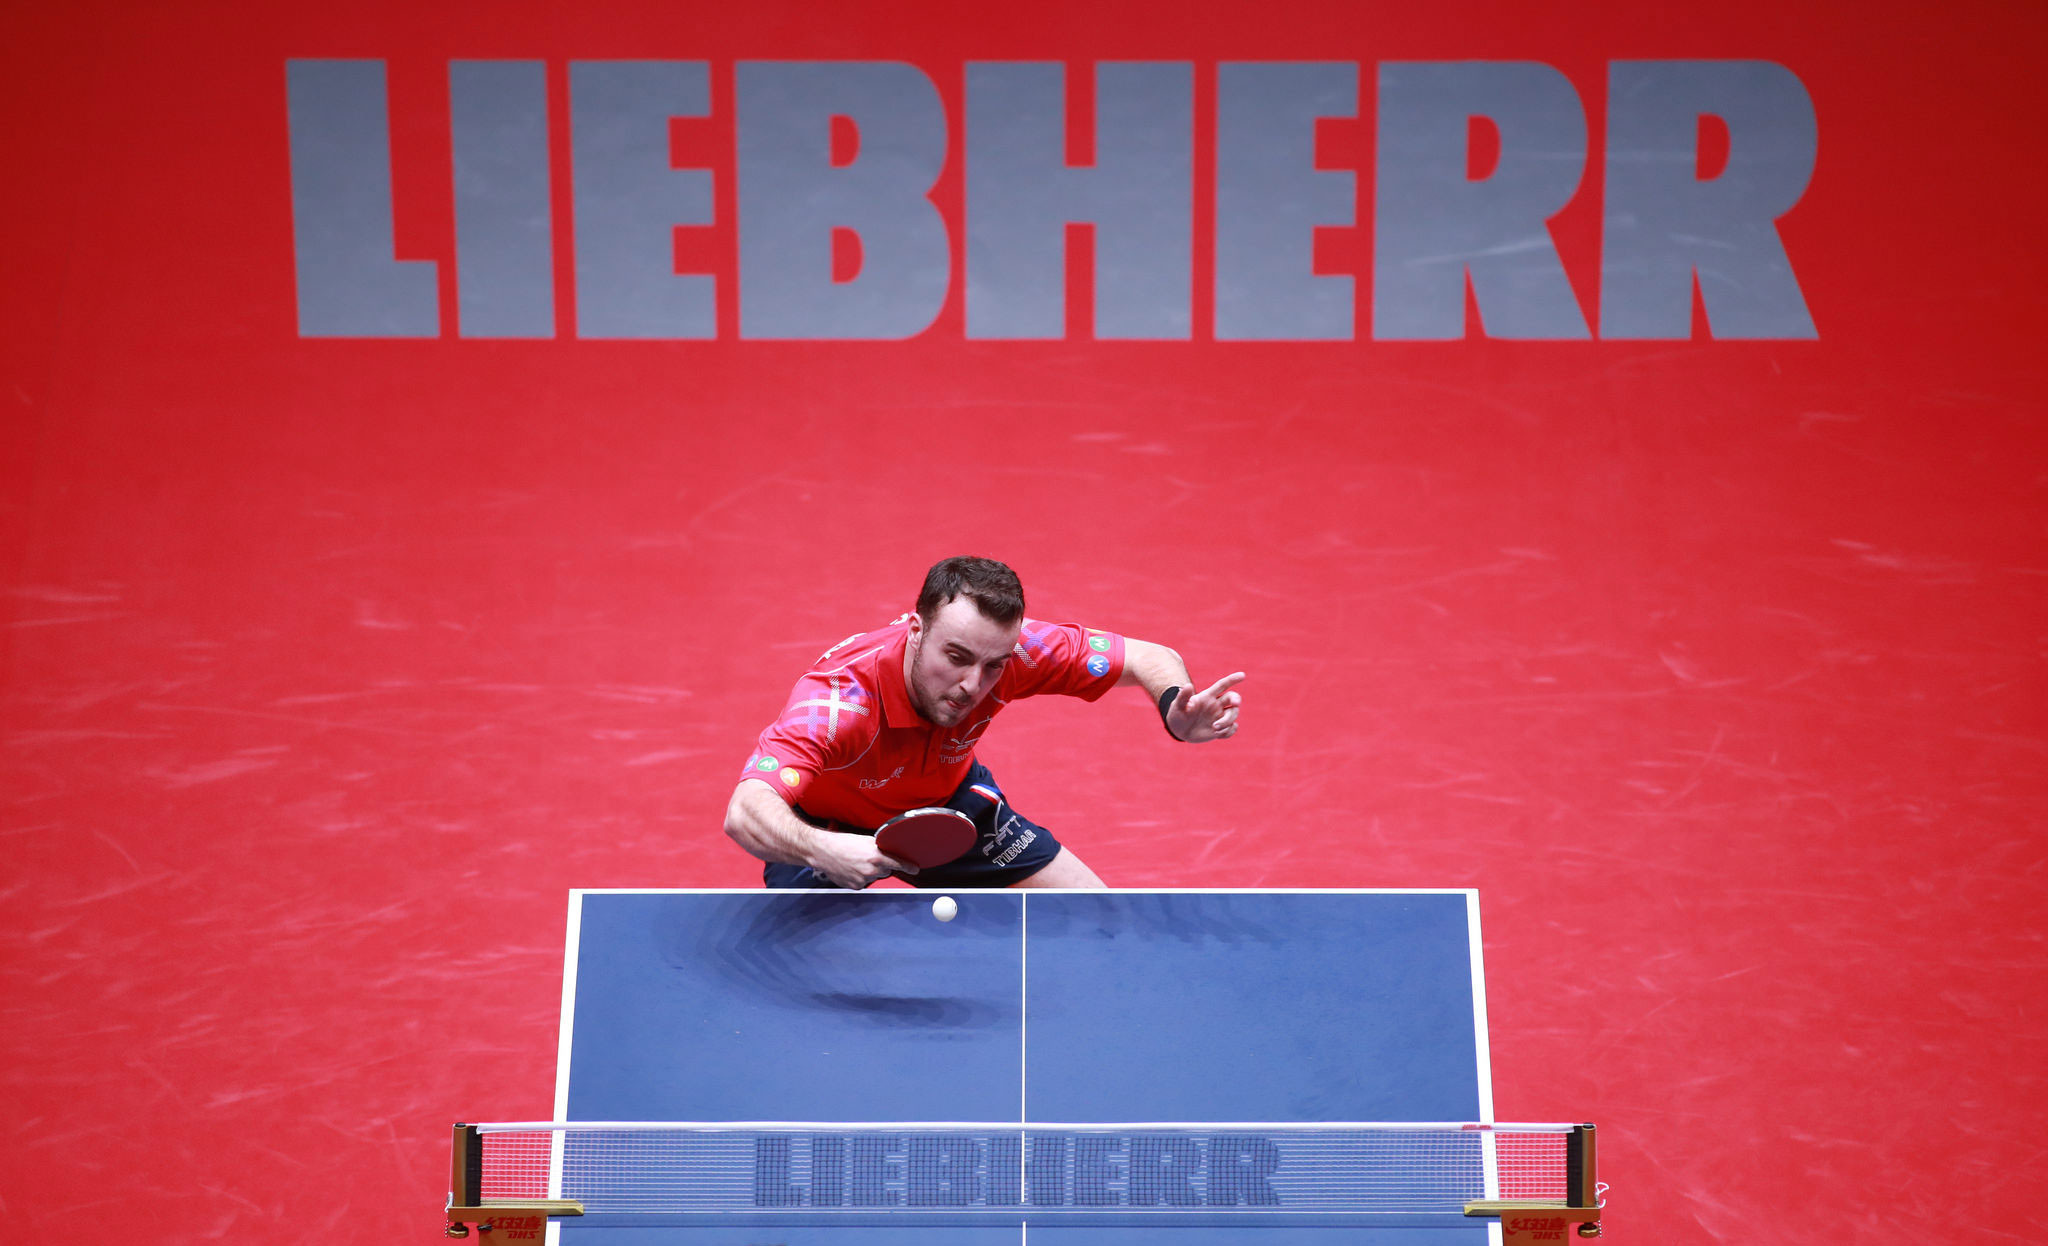 Liebherr has been announced as sponsor of the 2019 and 2020 International Table Tennis Federation World and European Championships ©ITTF